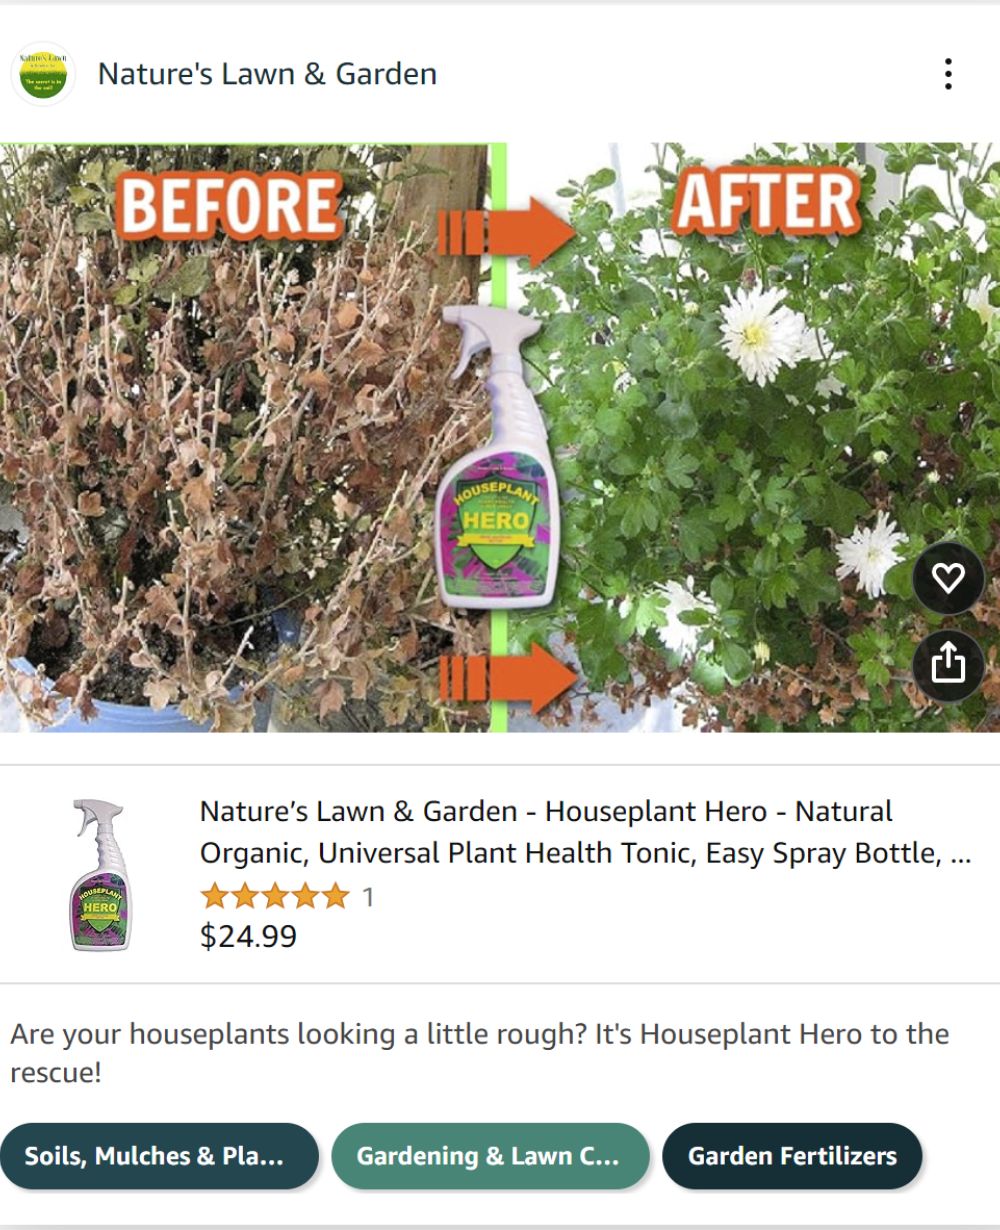 Amazon Posts Example - Nature's Lawn